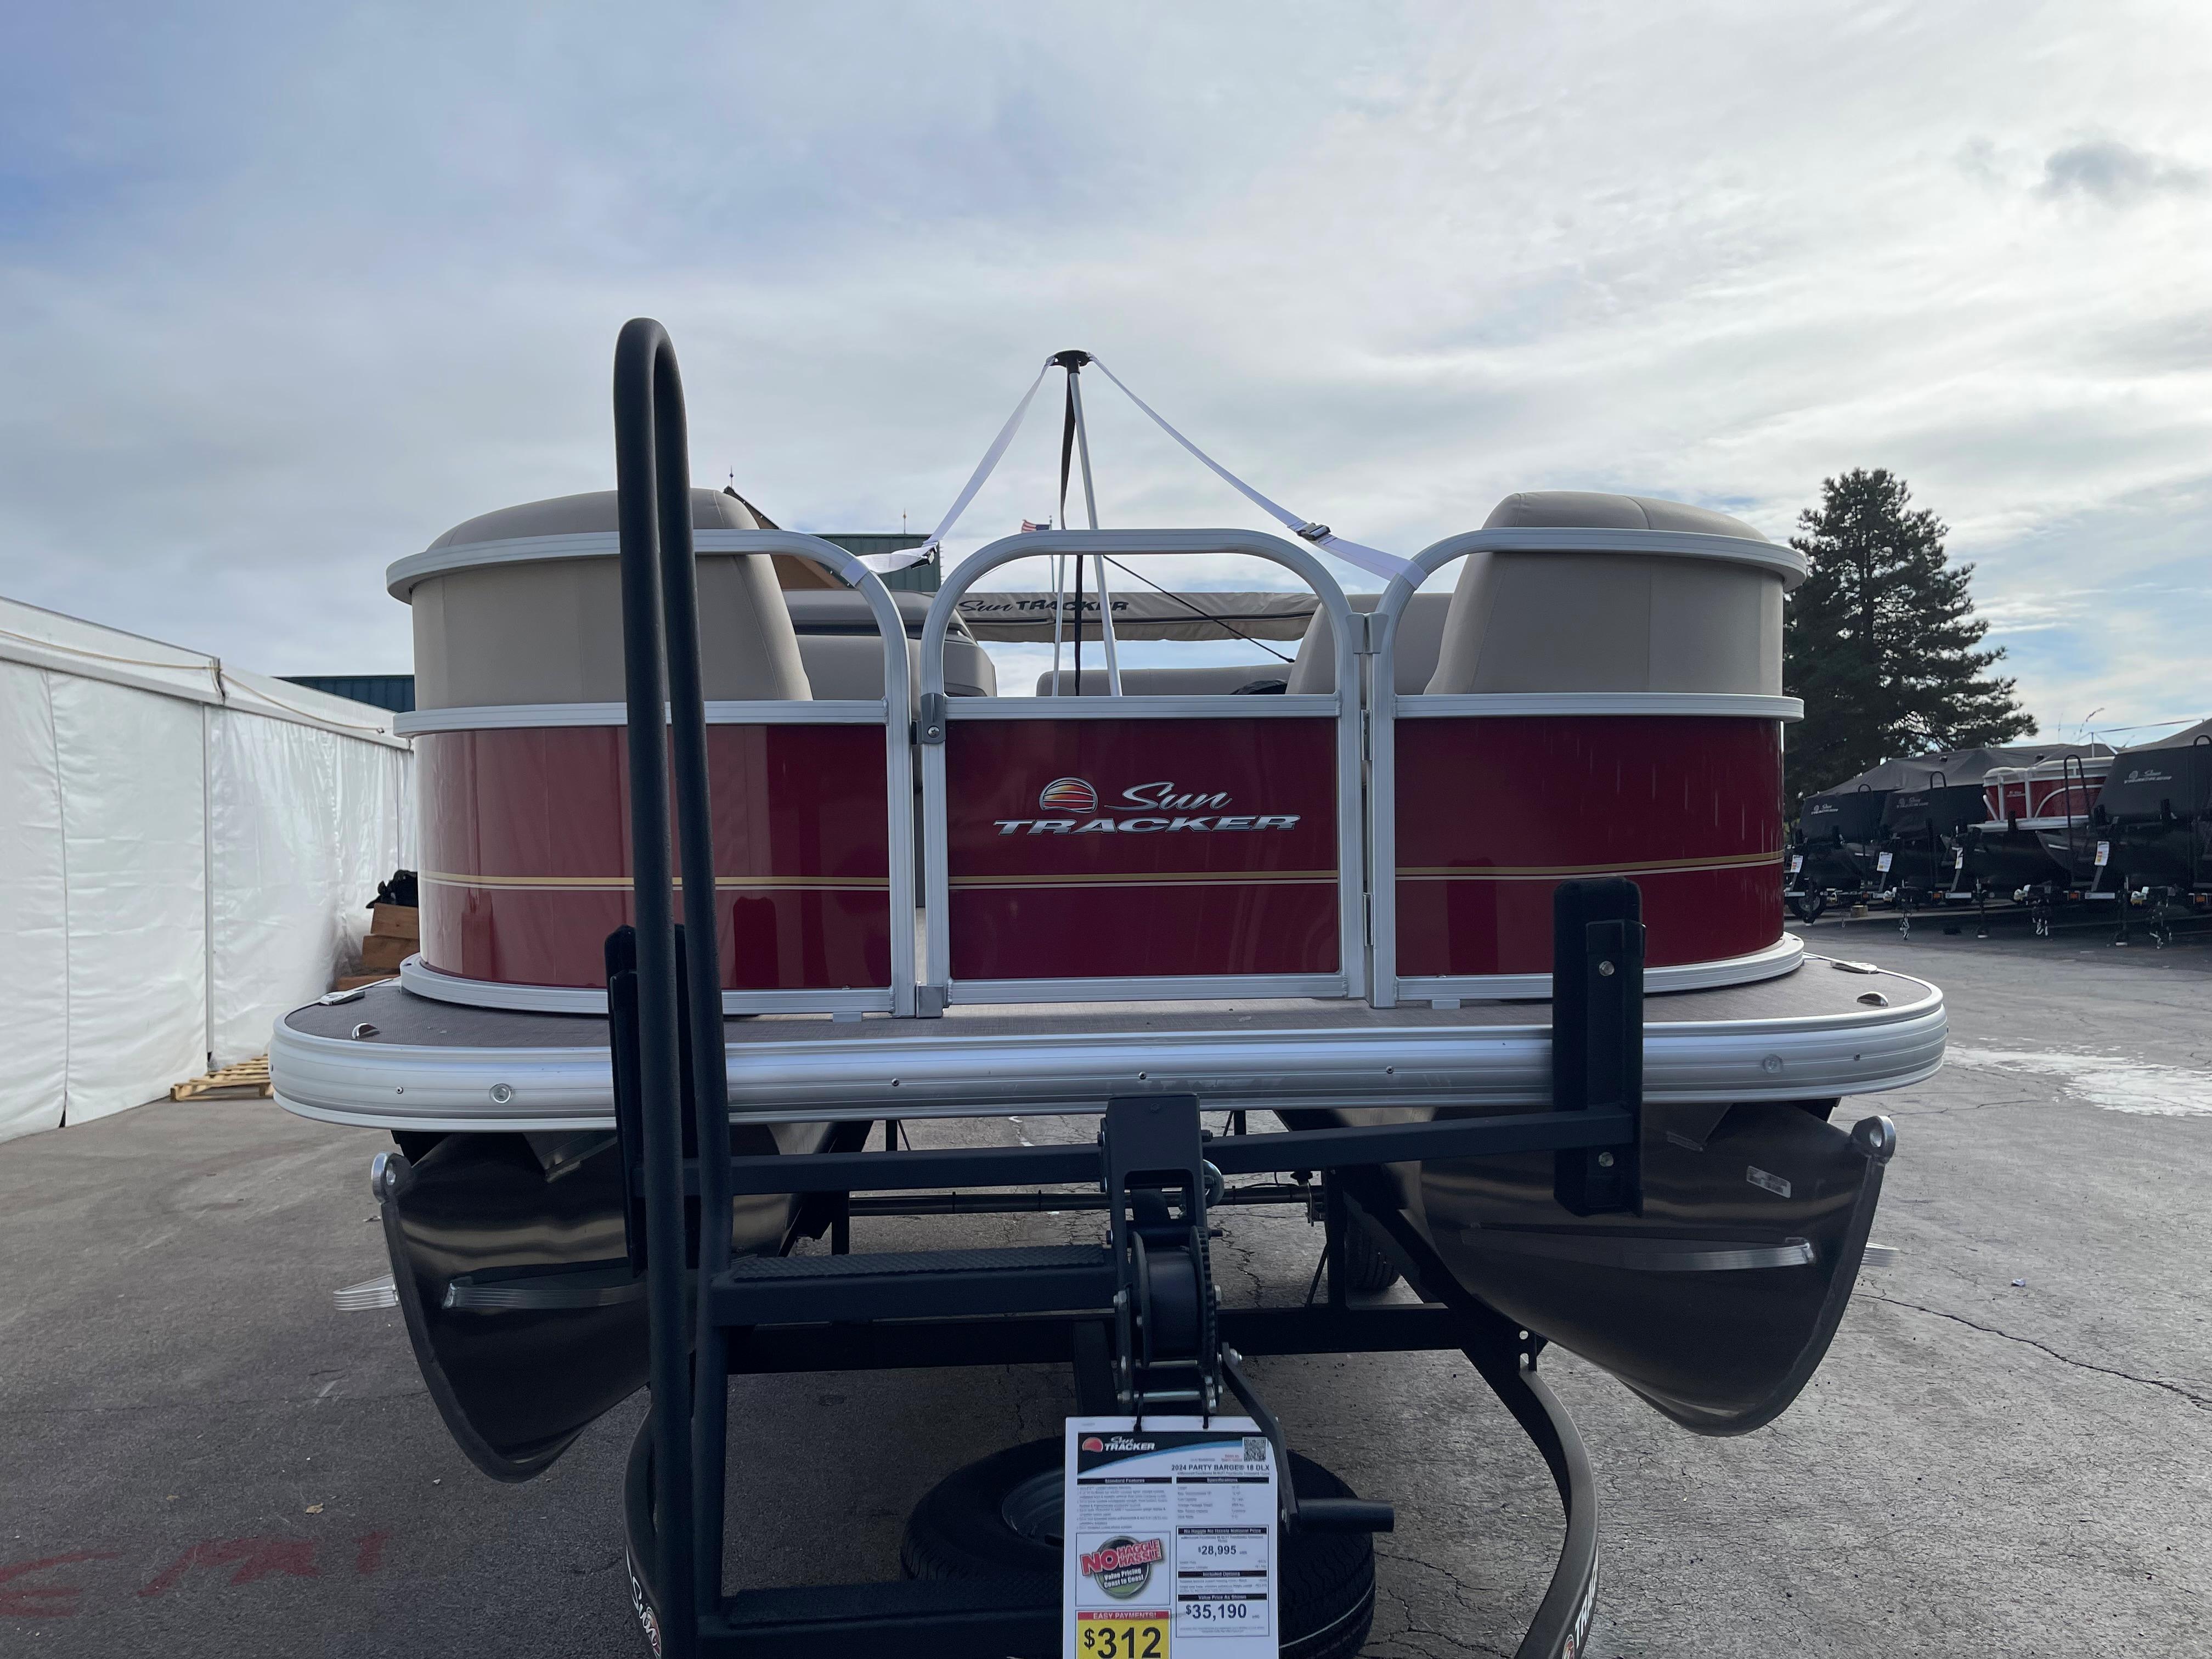 New 2024 Sun Tracker Party Barge 18 DLX, 63301 Saint Charles Boat Trader